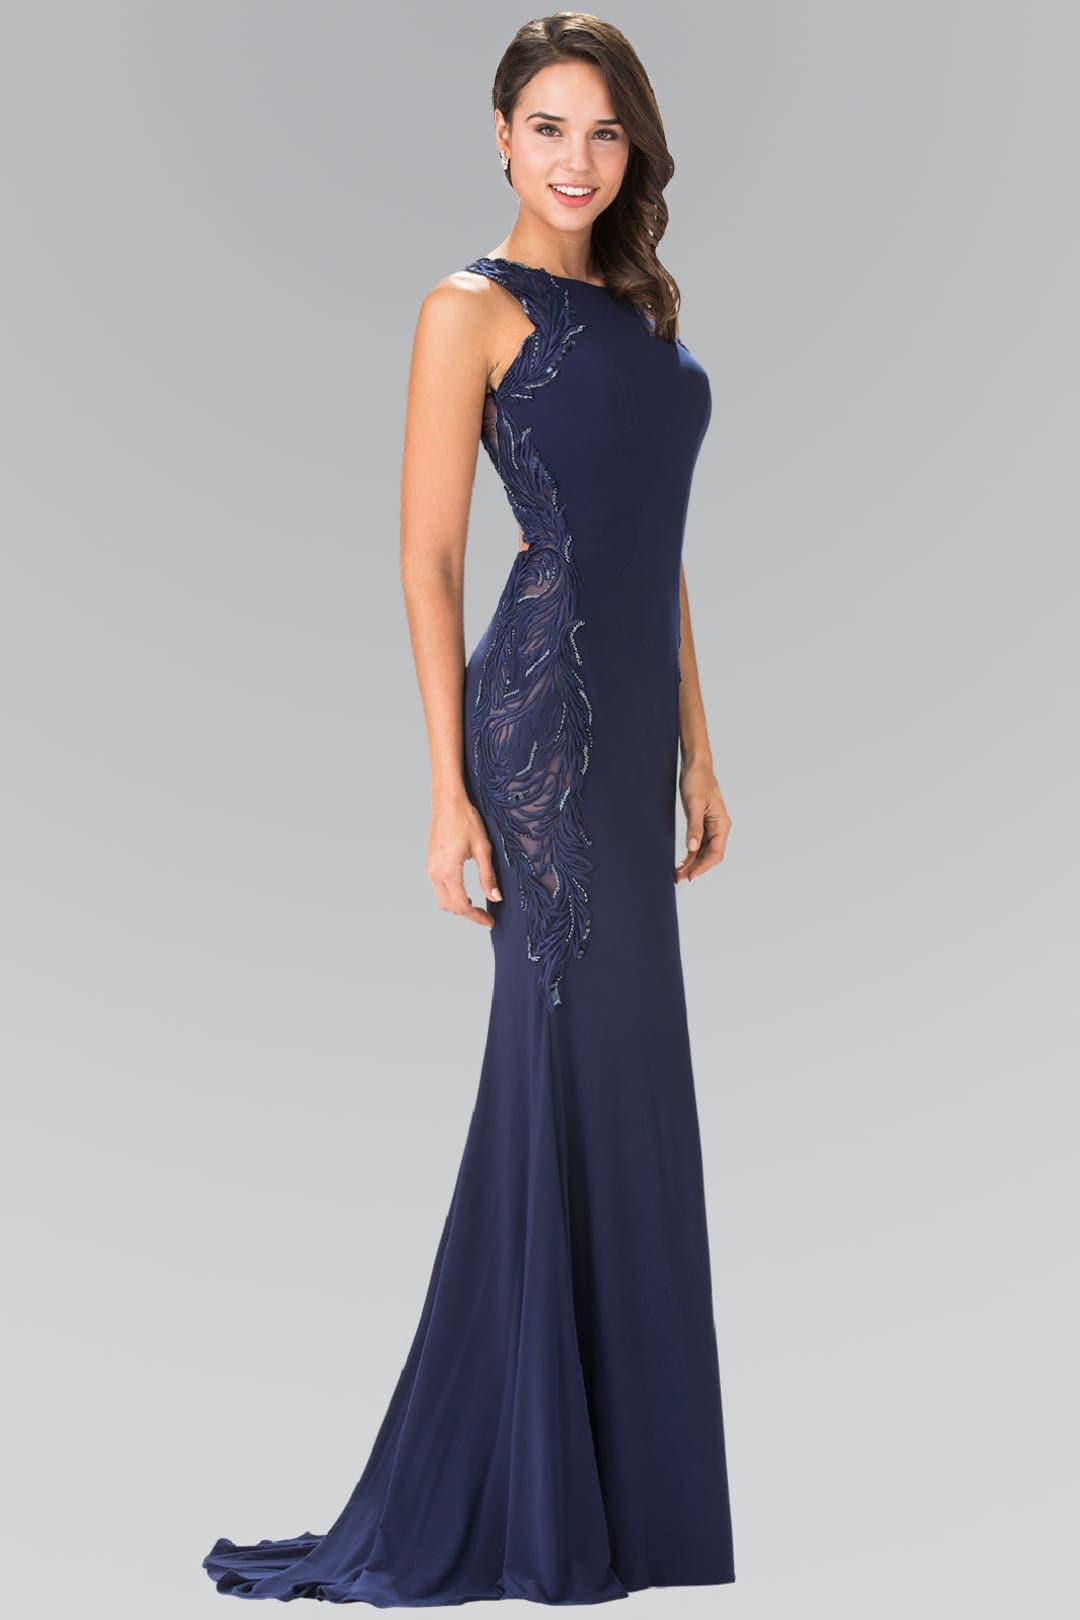 Bodycon Formal Gown - LAS2222 - NAVY BLUE / XS